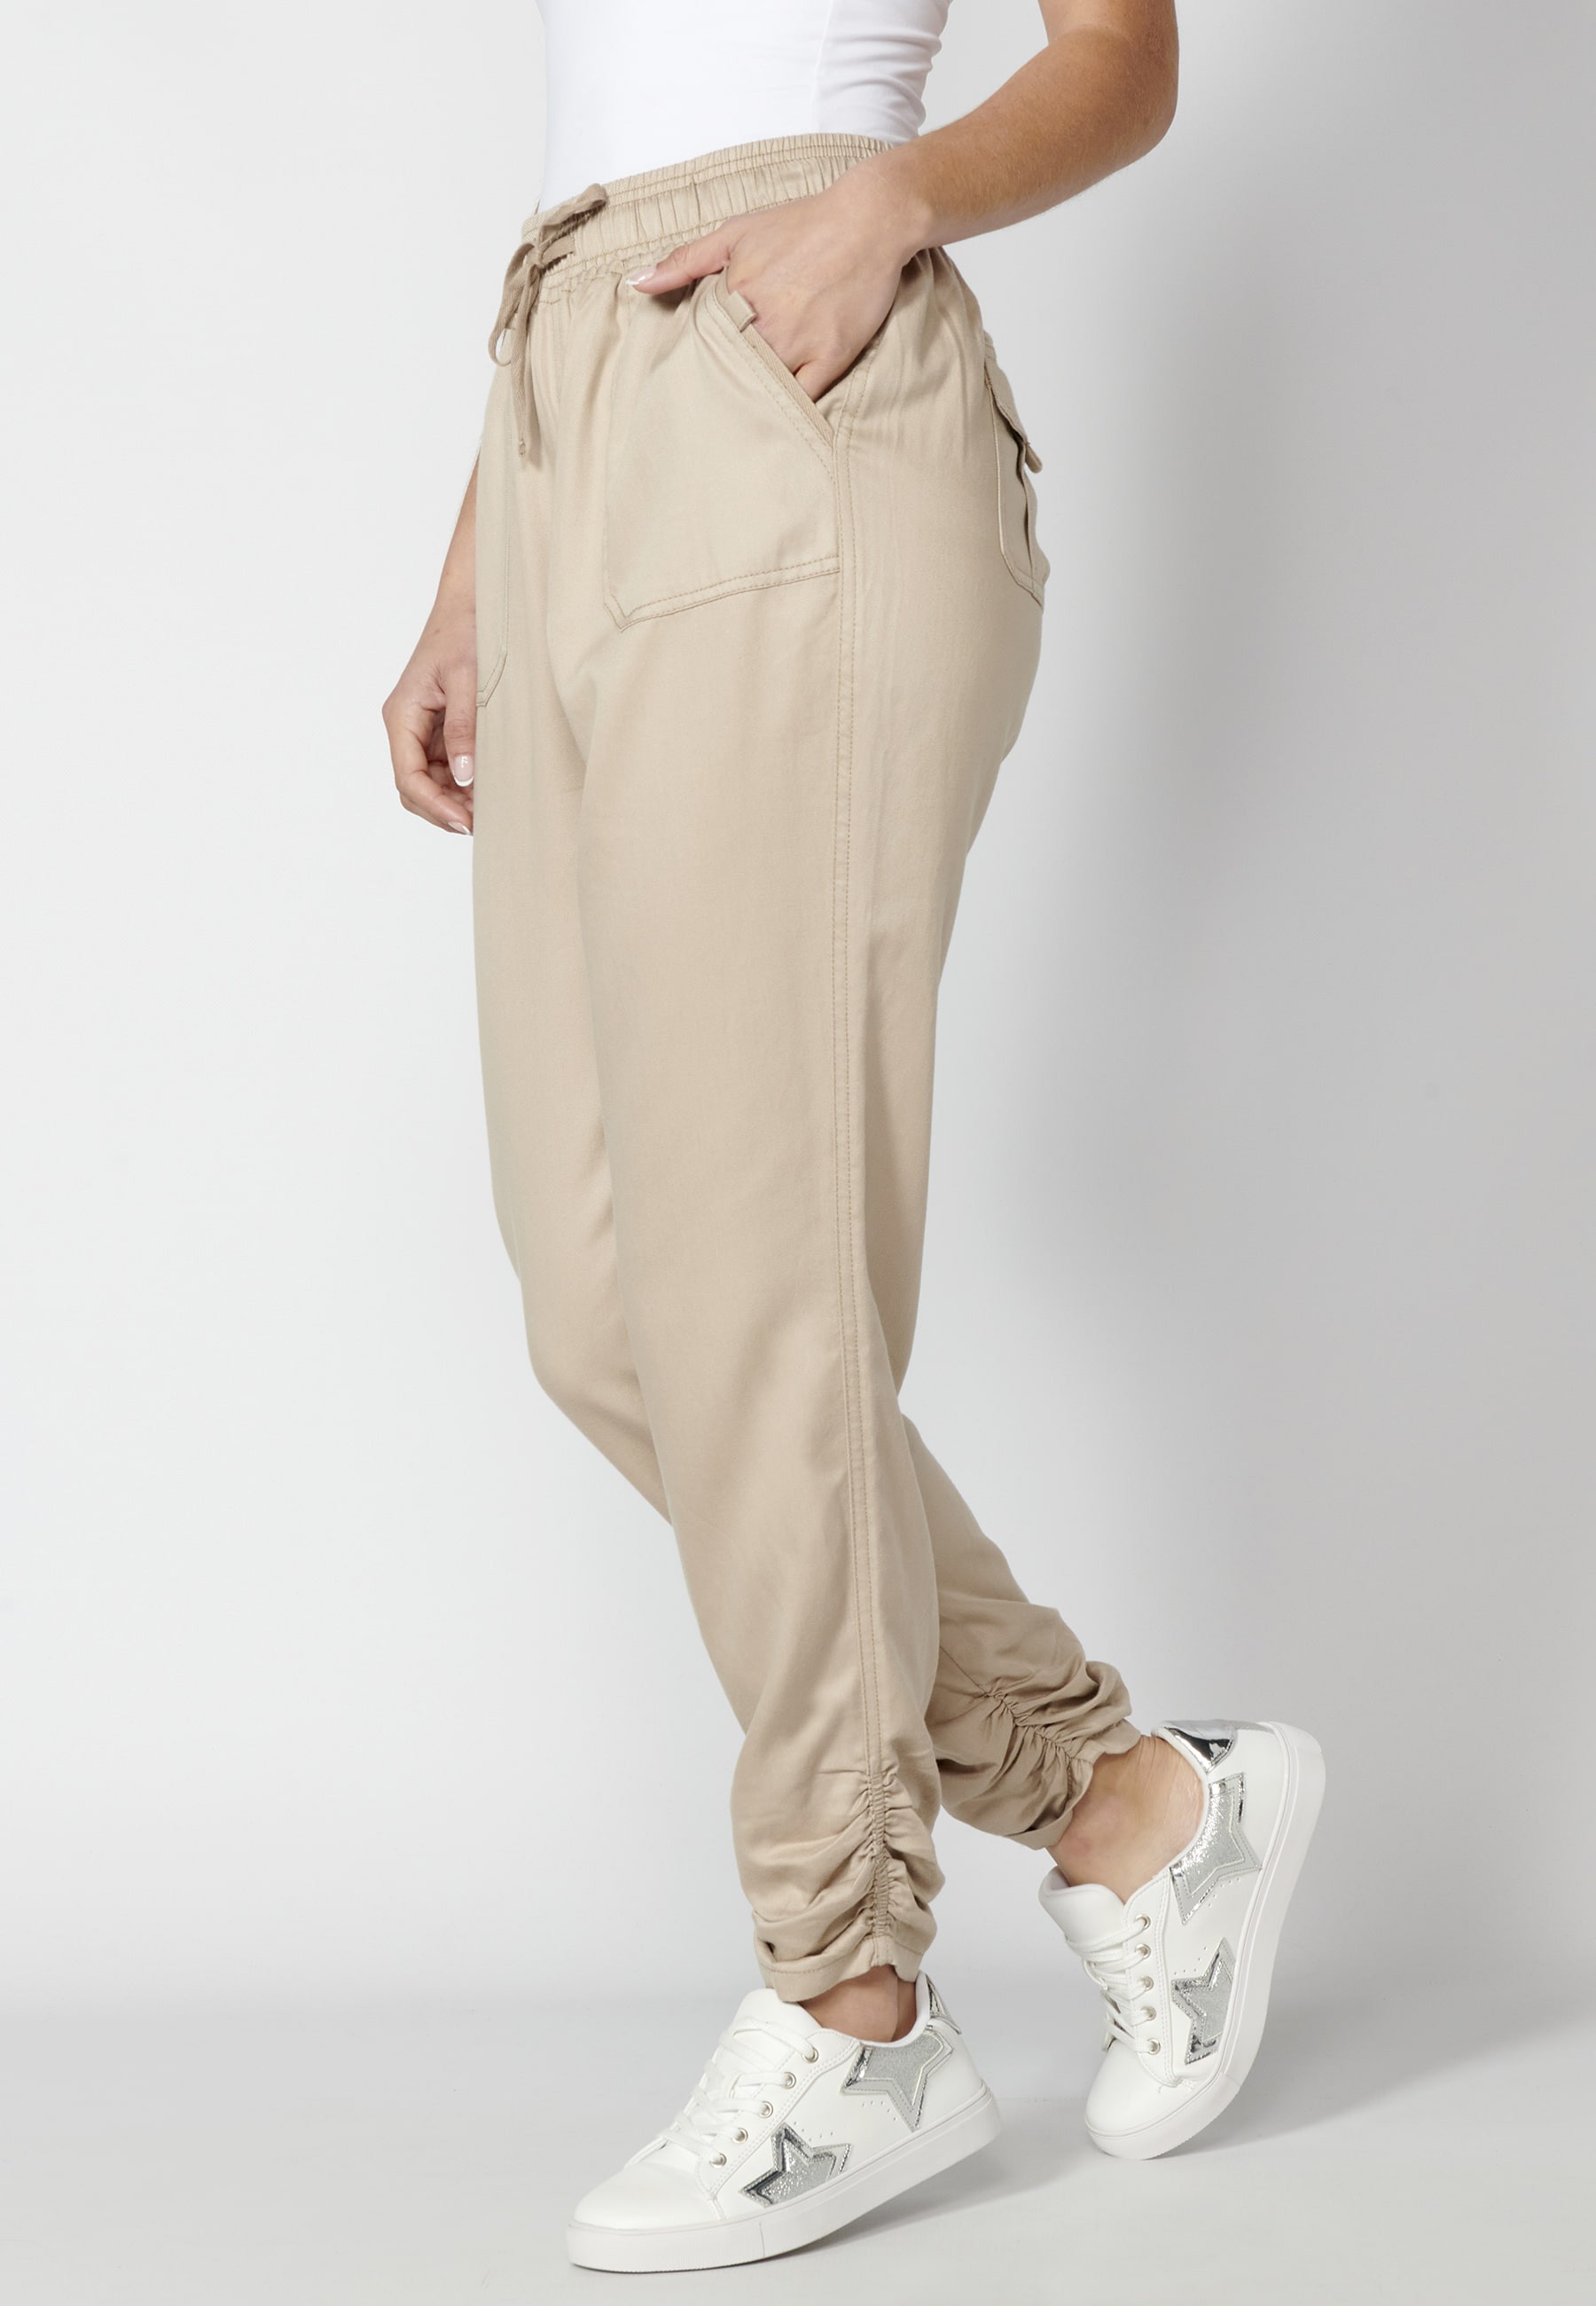 Long pants with adjustable waist in Beige color for Woman